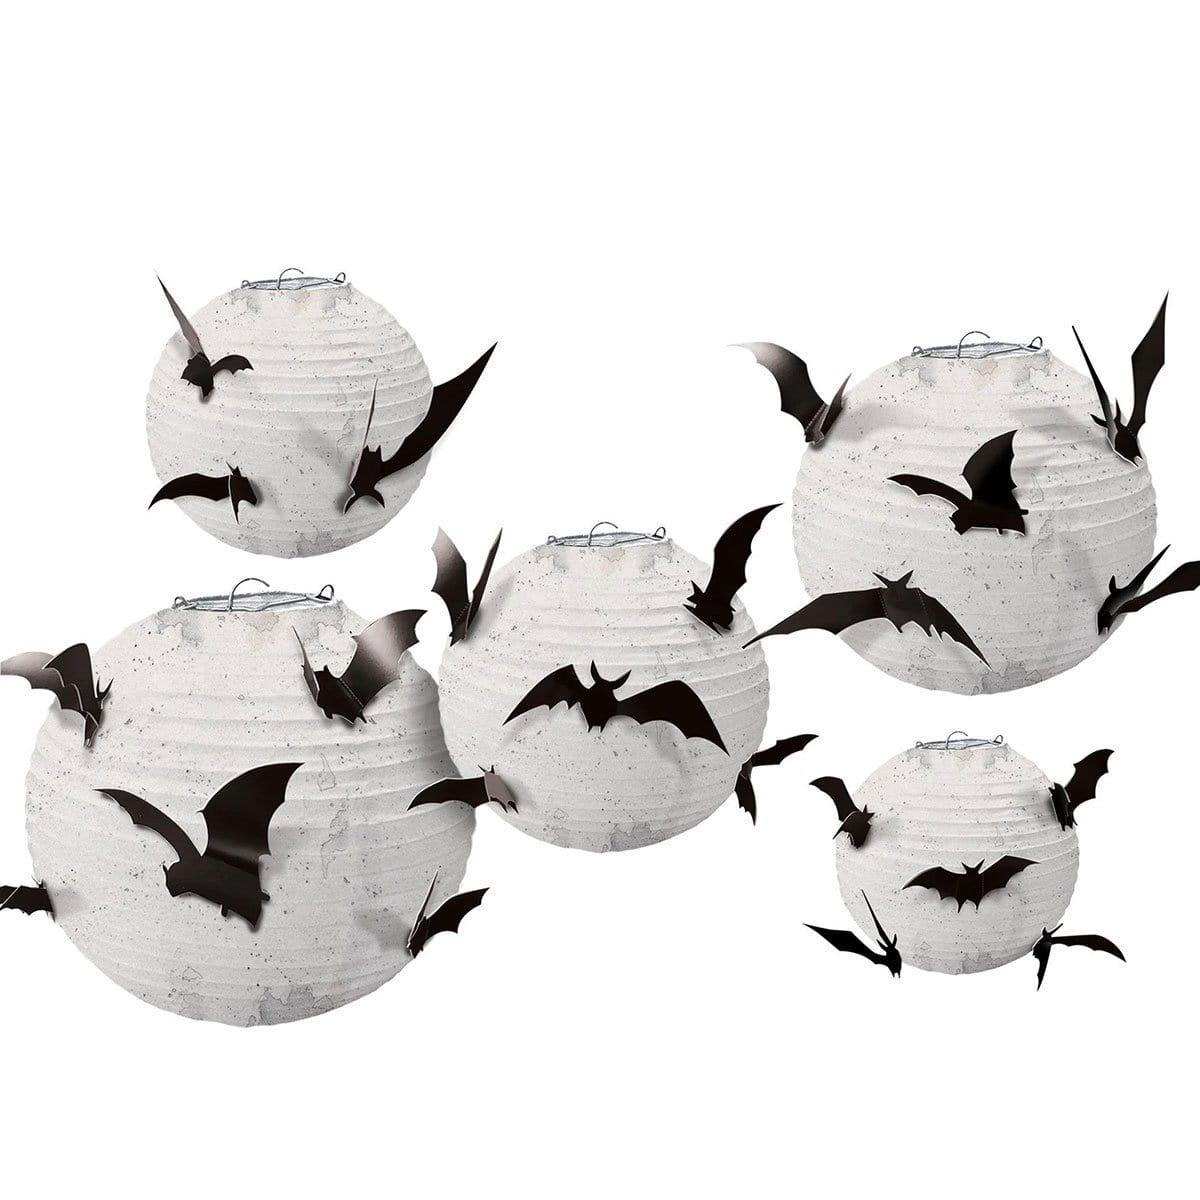 Buy Halloween Lantern With Bats, 5 count sold at Party Expert